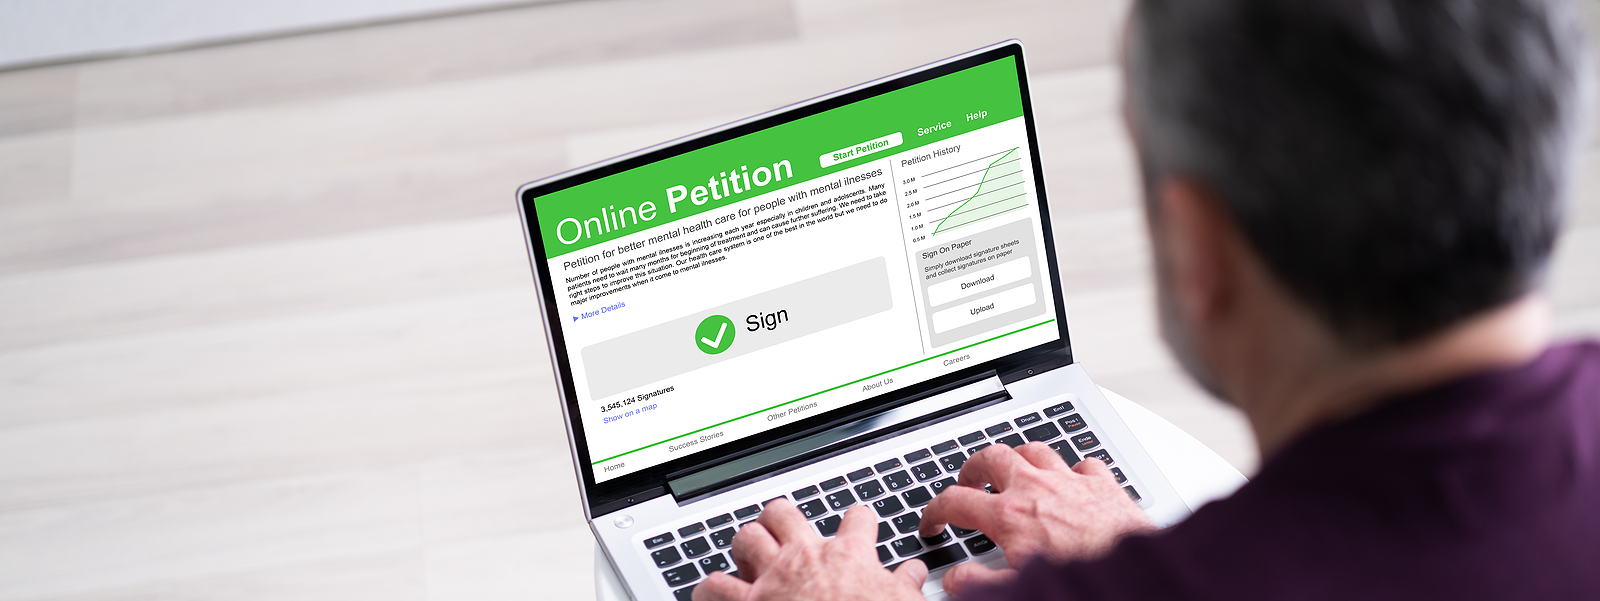 online petitions